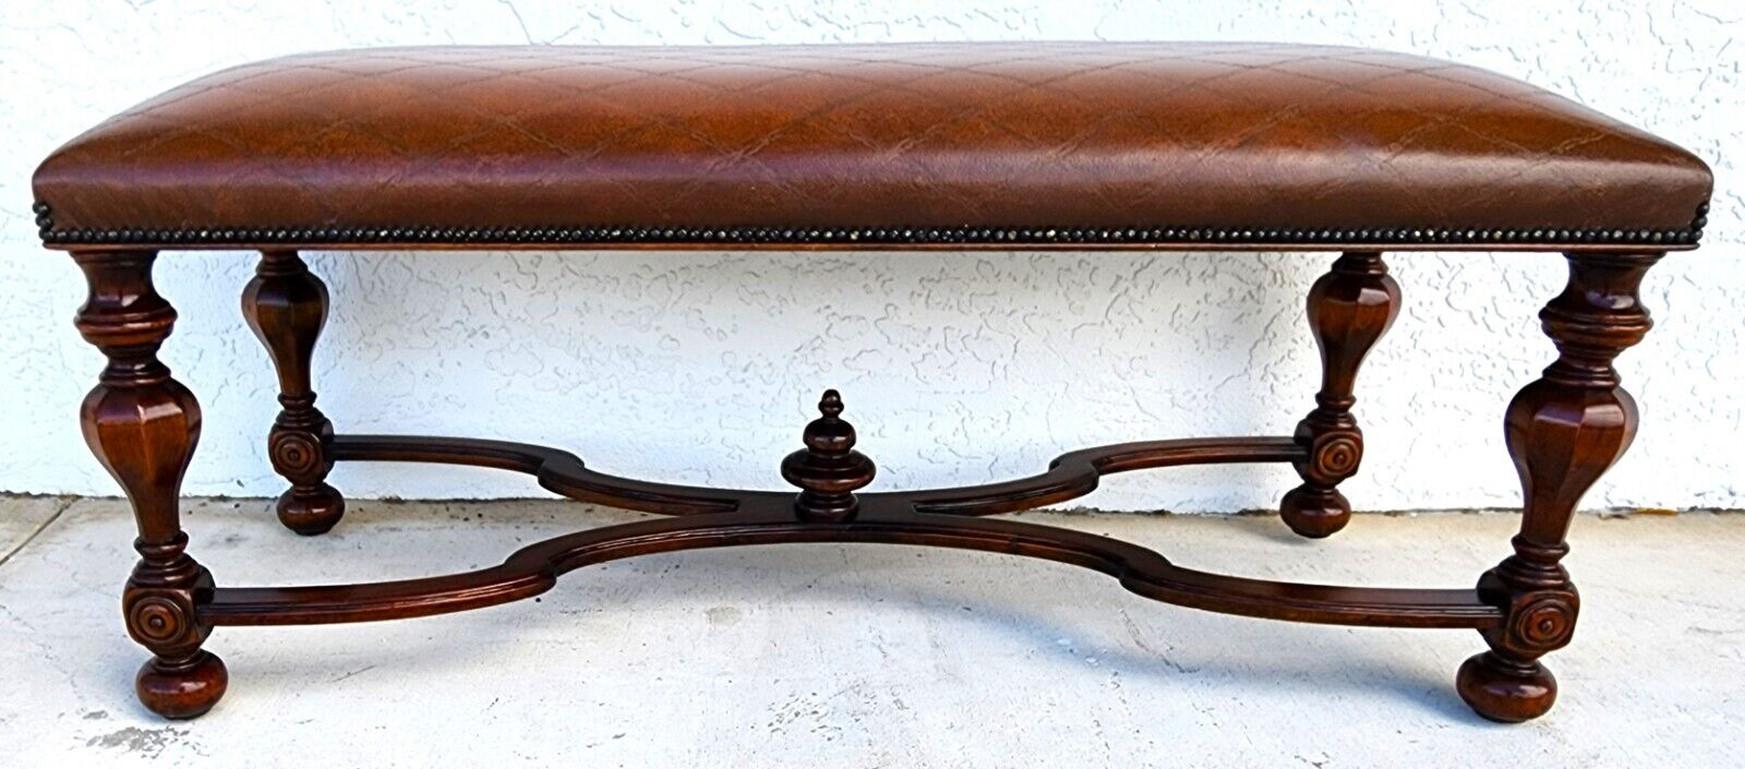 Offering one of our recent Palm Beach estate fine furniture acquisitions of a
Tooled leather bench by Theodore Alexander

Approximate measurements in inches
21.5